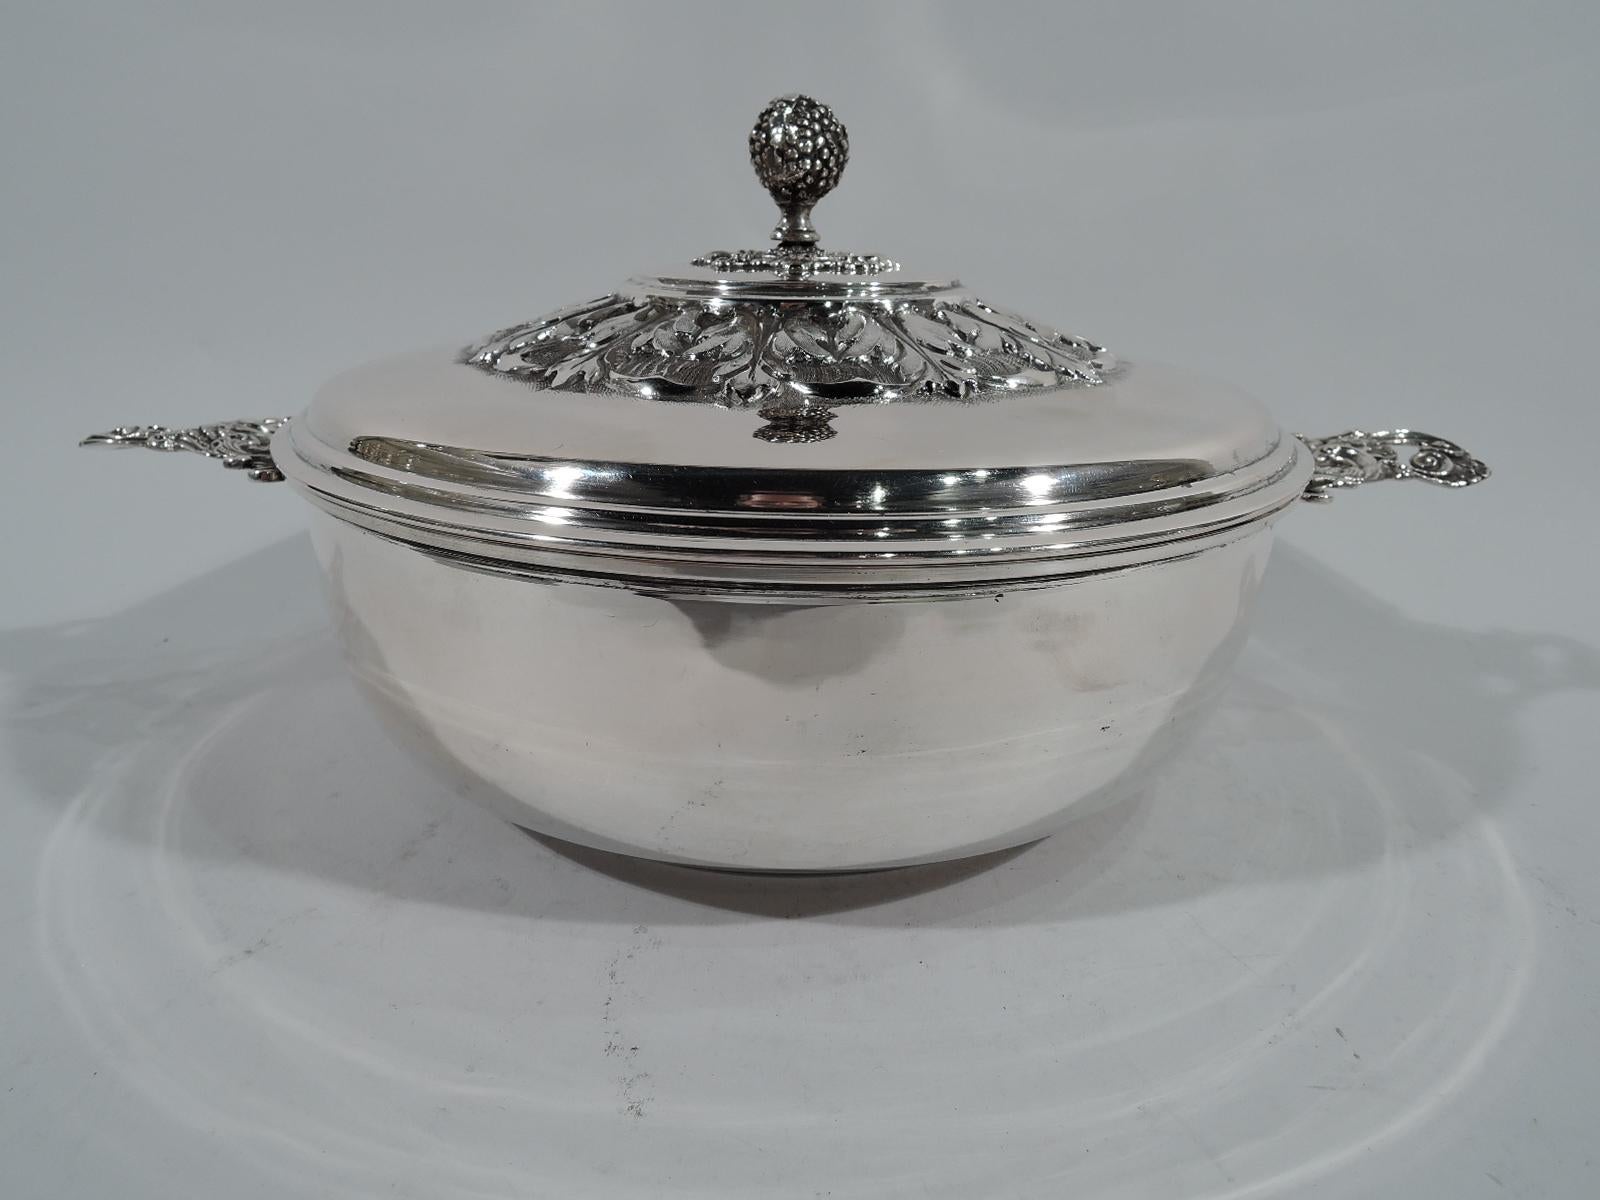 Italian 800 silver covered vegetable serving dish. Bowl has curved sides and inset foot ring. Handles with pierced scrolls and scallop shells mounted to sides. Raised cover with berry finial on delicately pierced mount in turn surrounded by bold